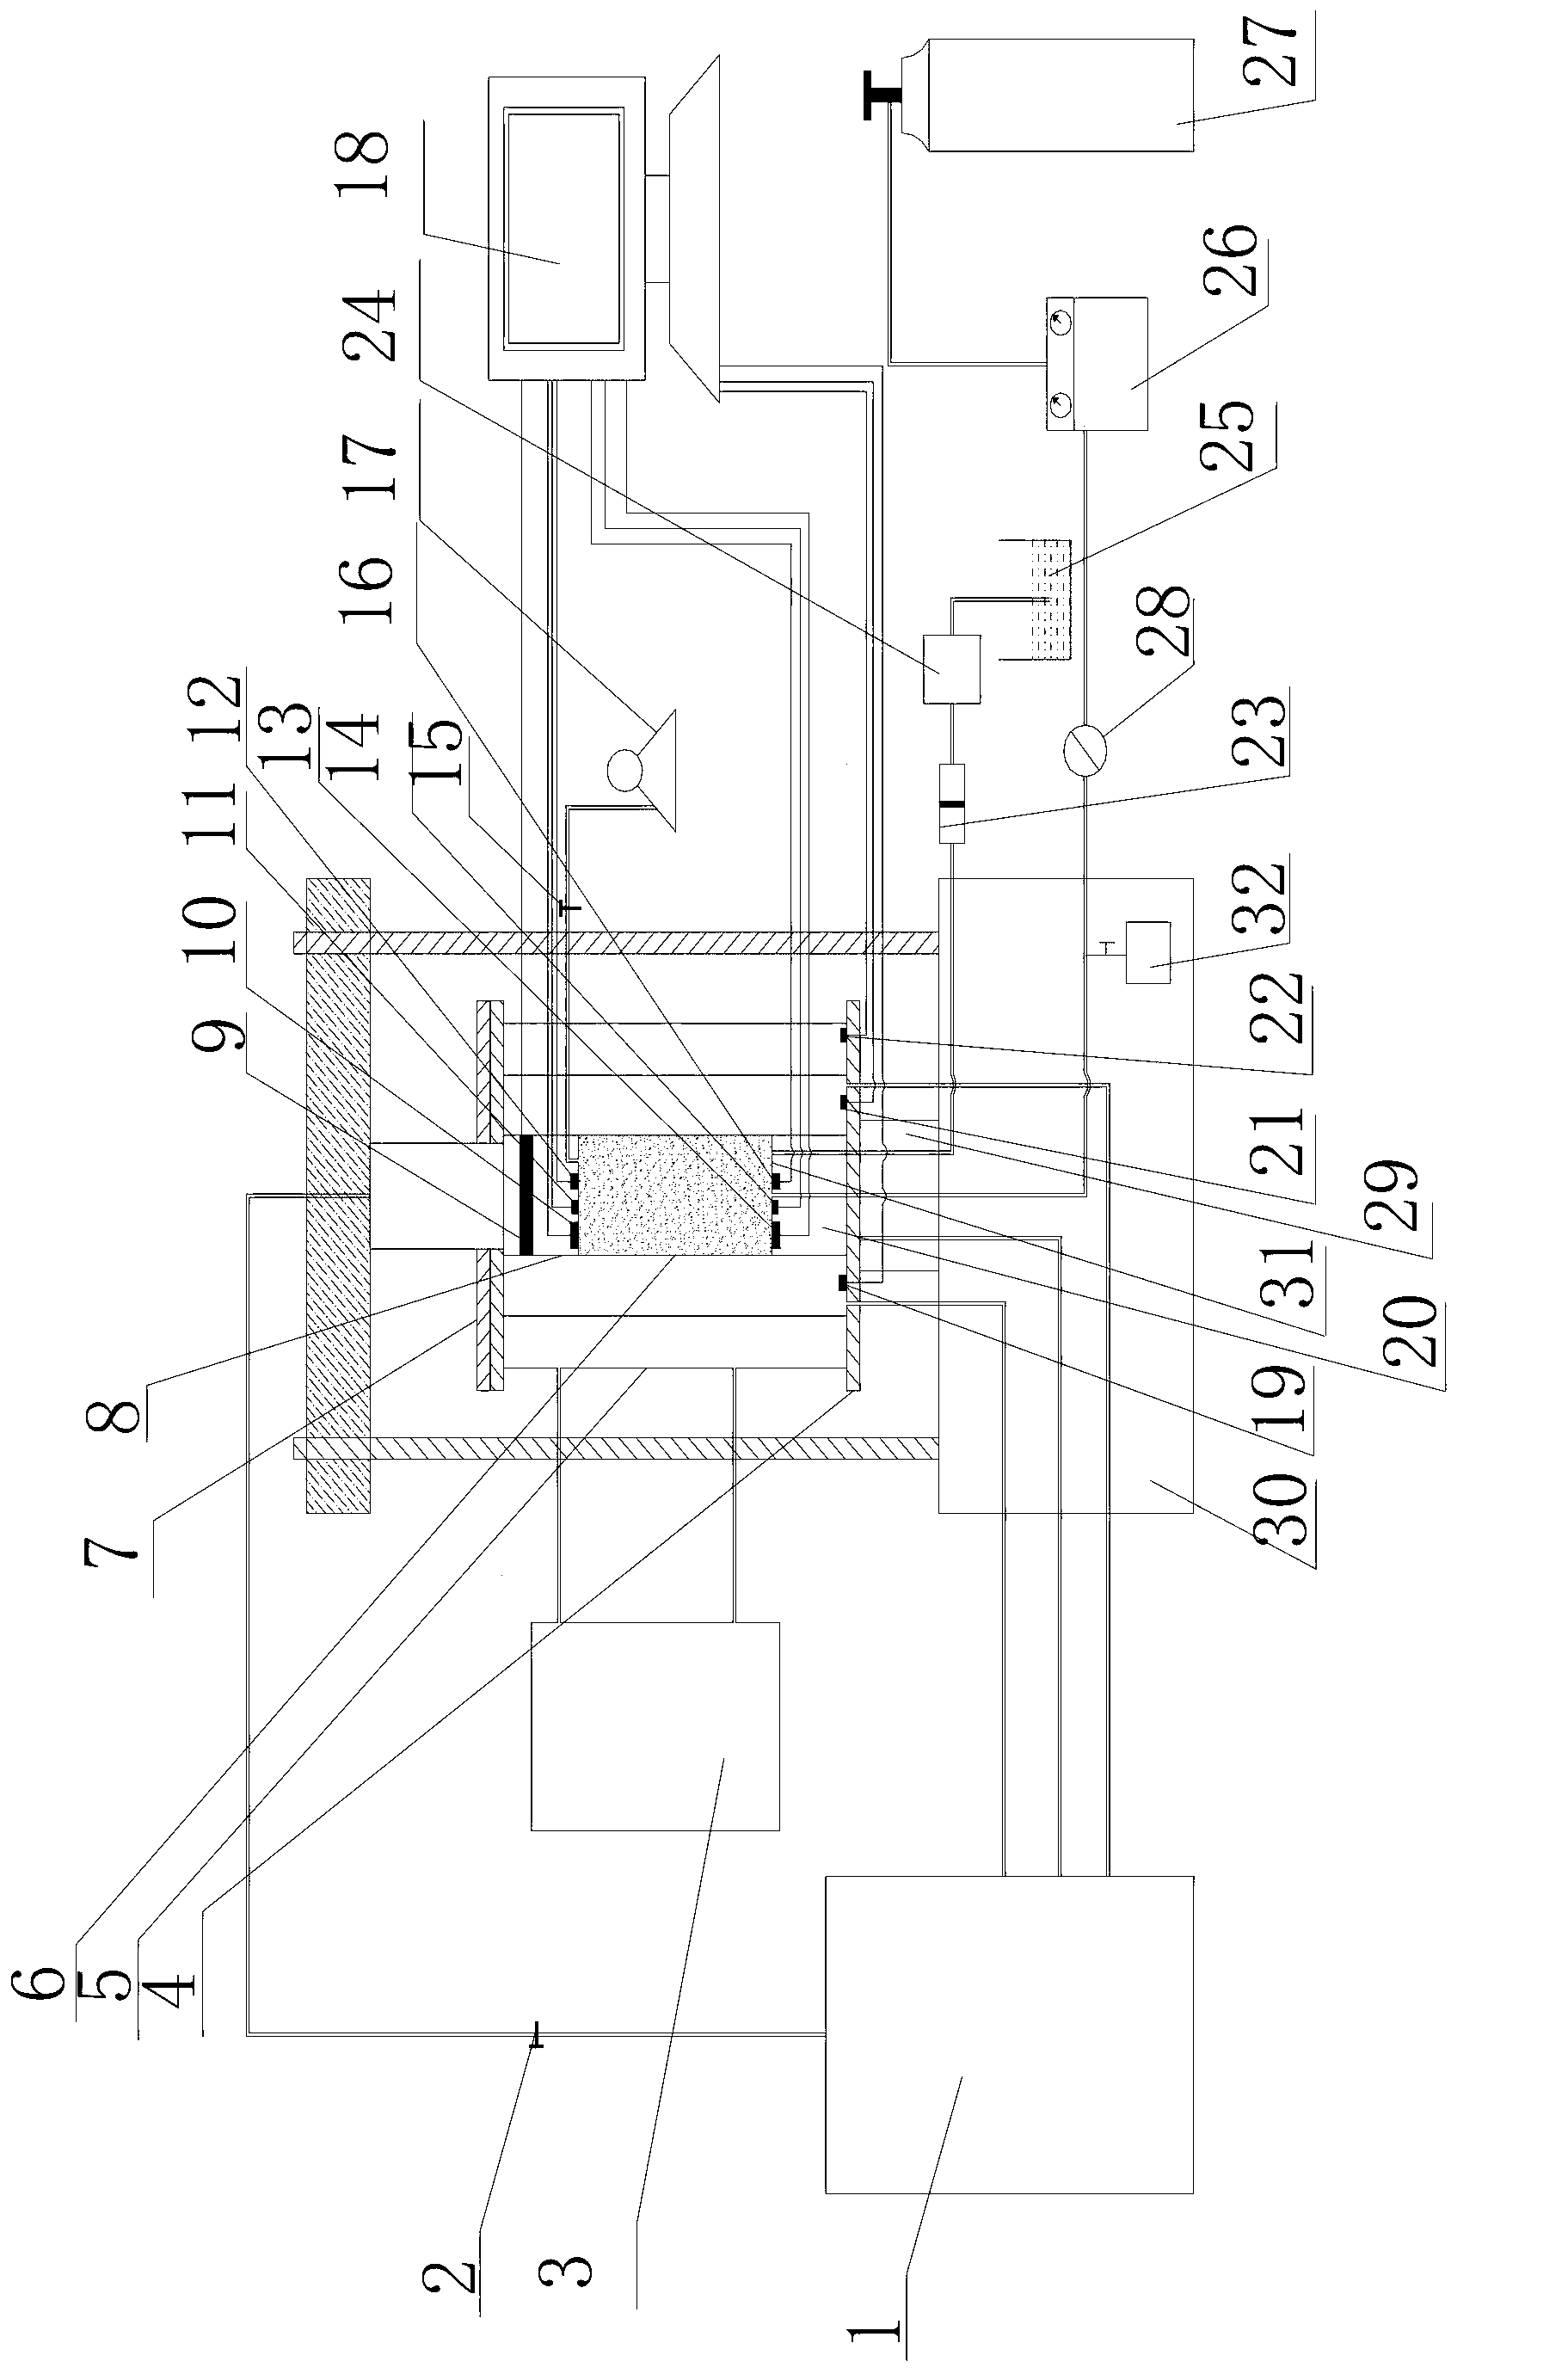 Natural gas hydrate deposit dynamic triaxial mechanic-acoustic-electrical synchronous test experimental device and method